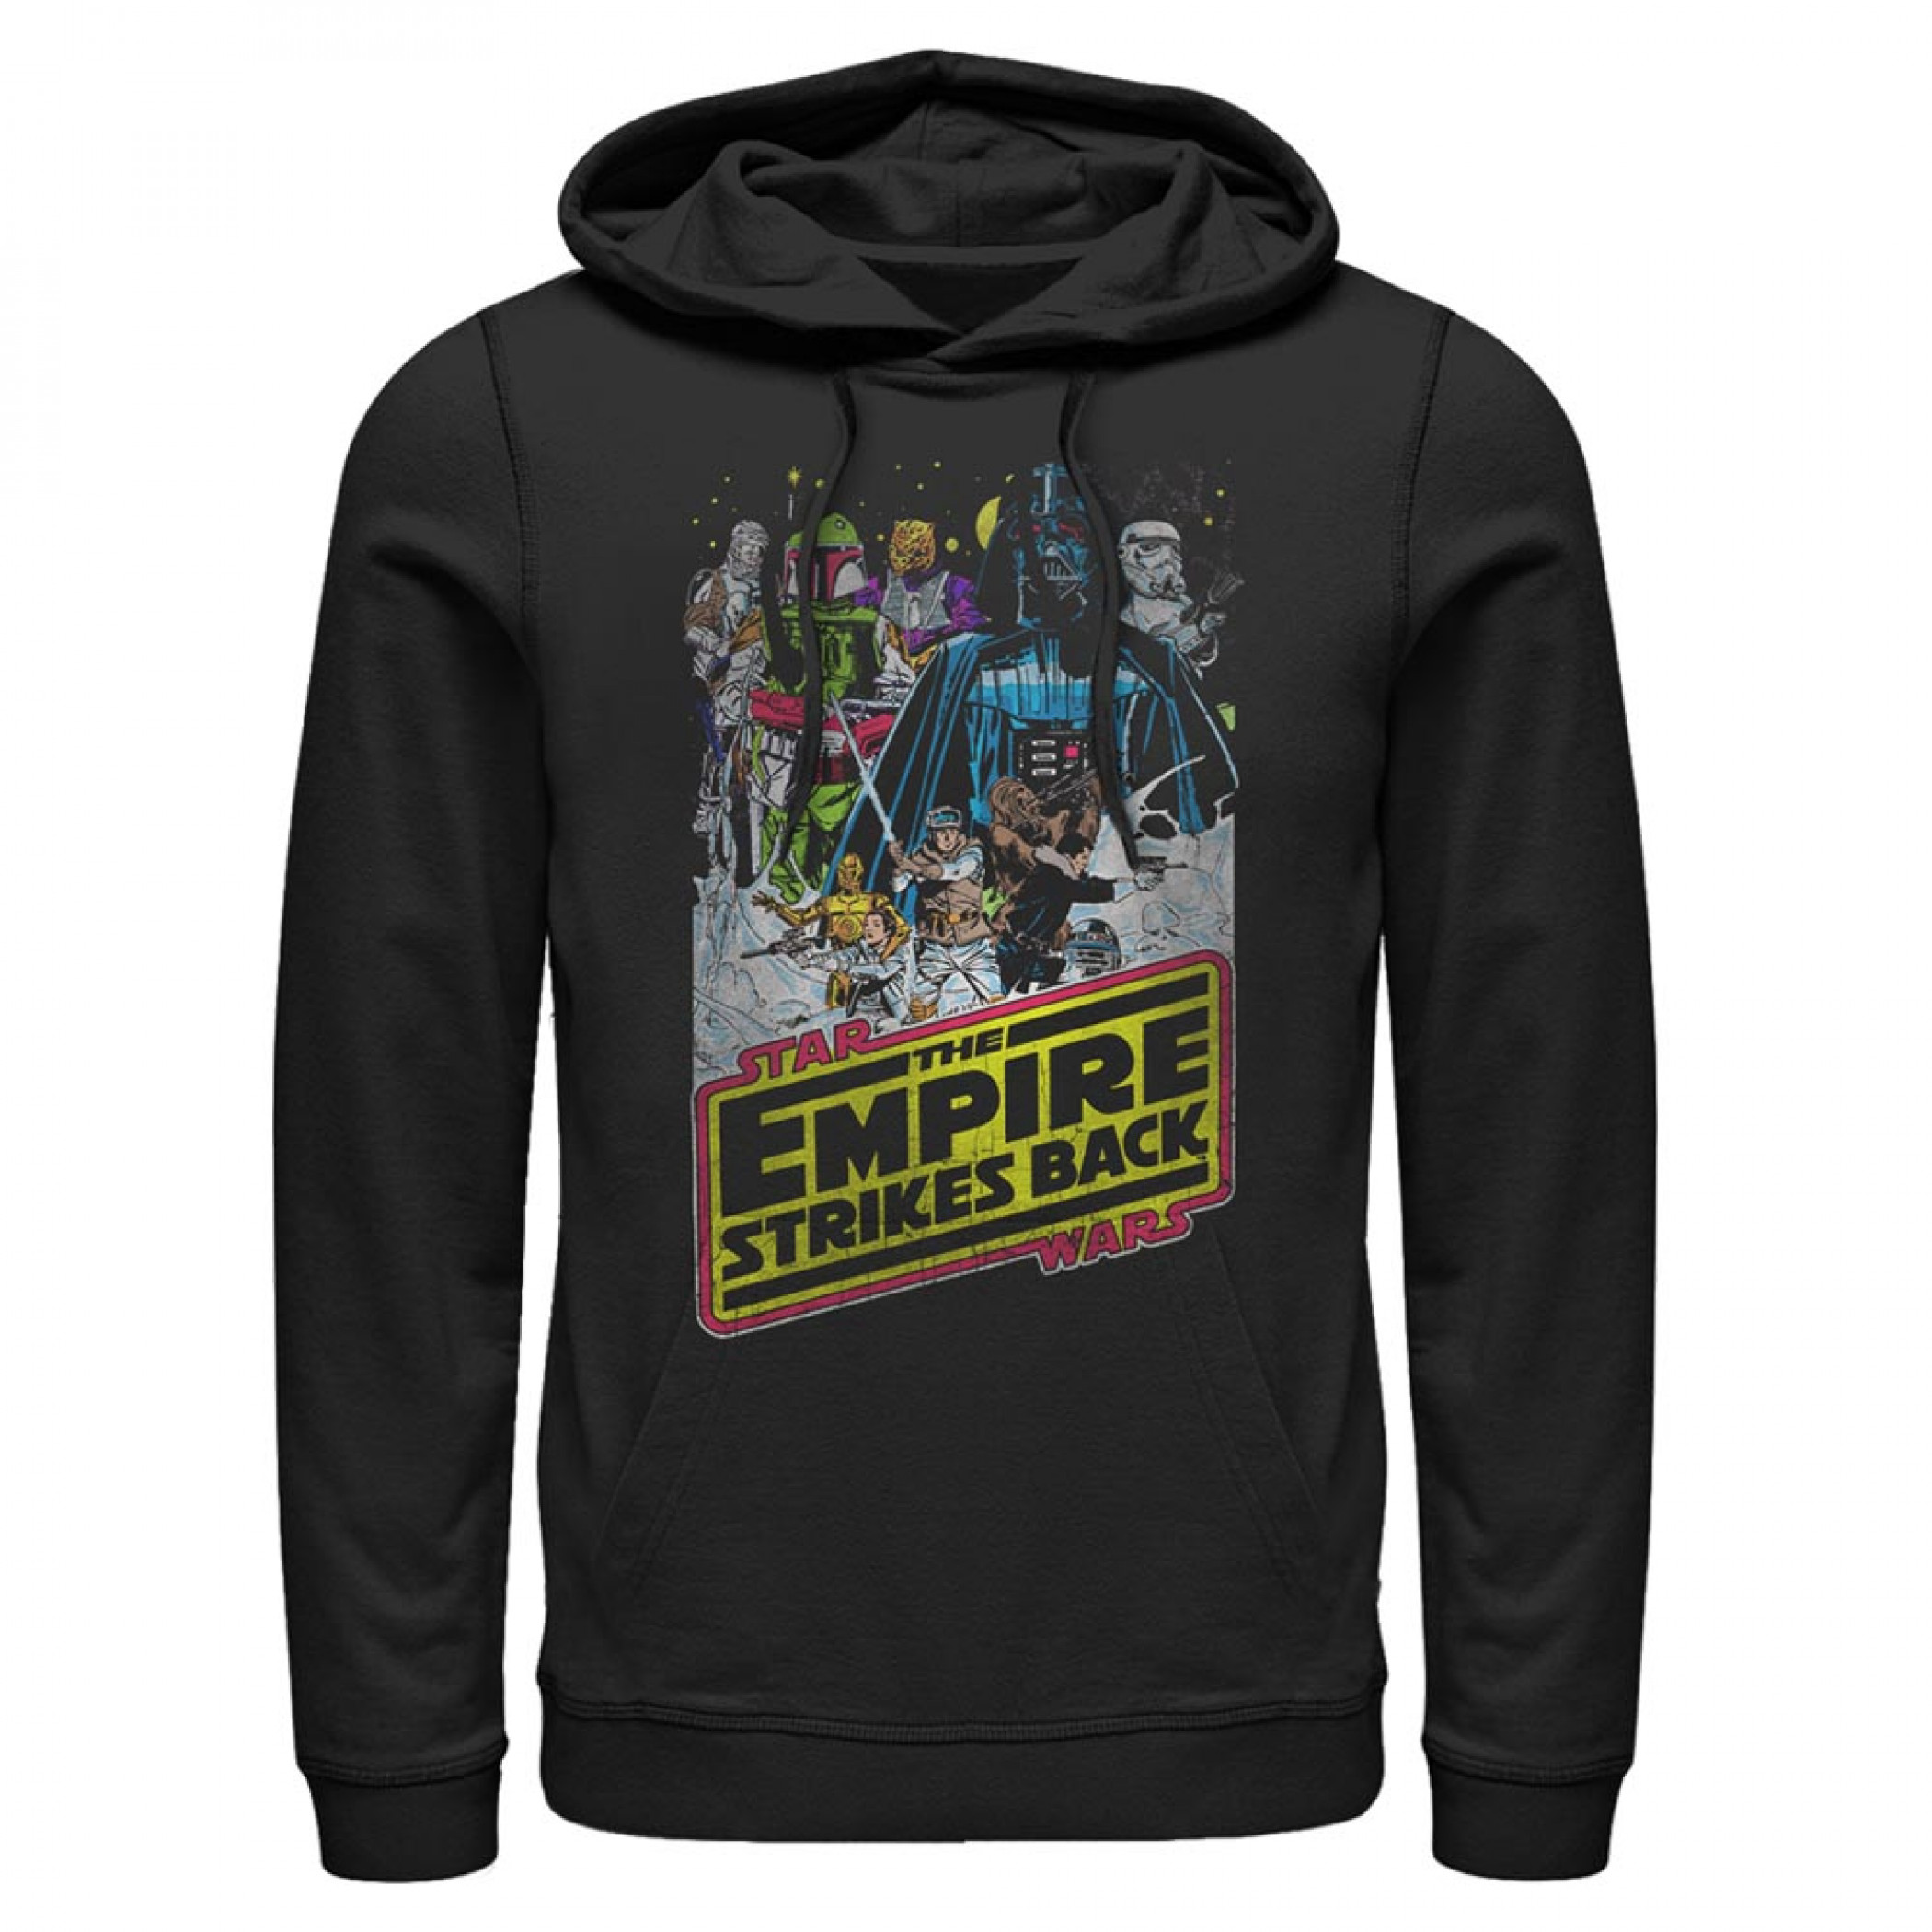 Star Wars The Empire Strikes Back on Hoth Pullover Hoodie